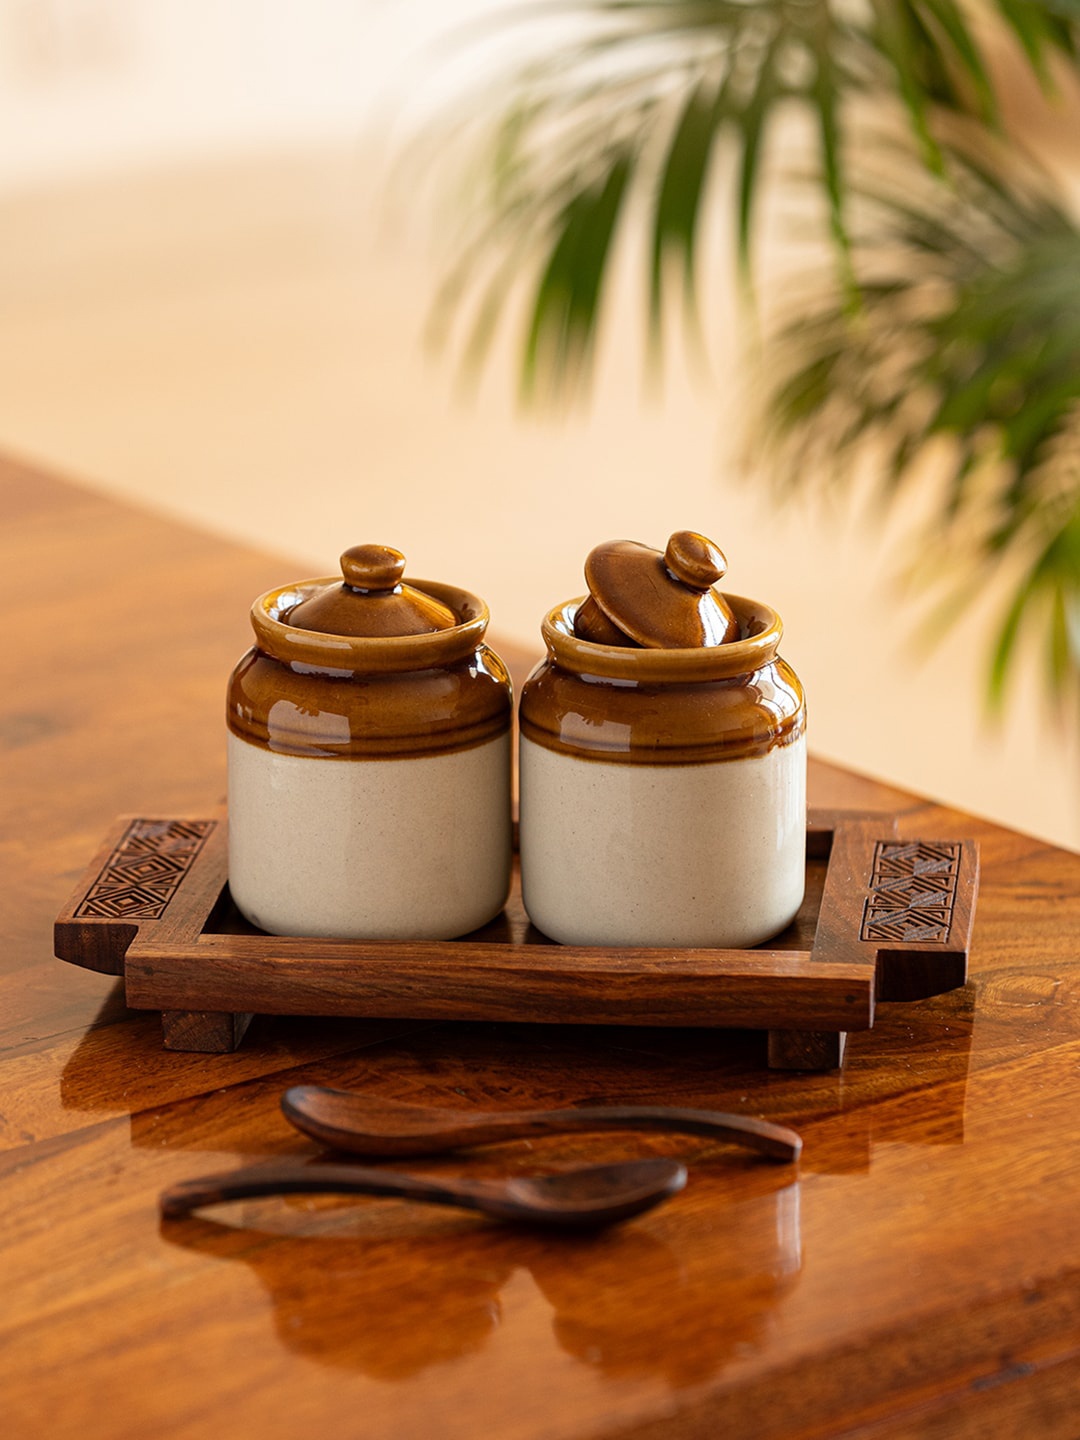 

ExclusiveLane Coffee Brown Ceramic Chutney & Pickle Jar Set With Wooden Spoons & Tray